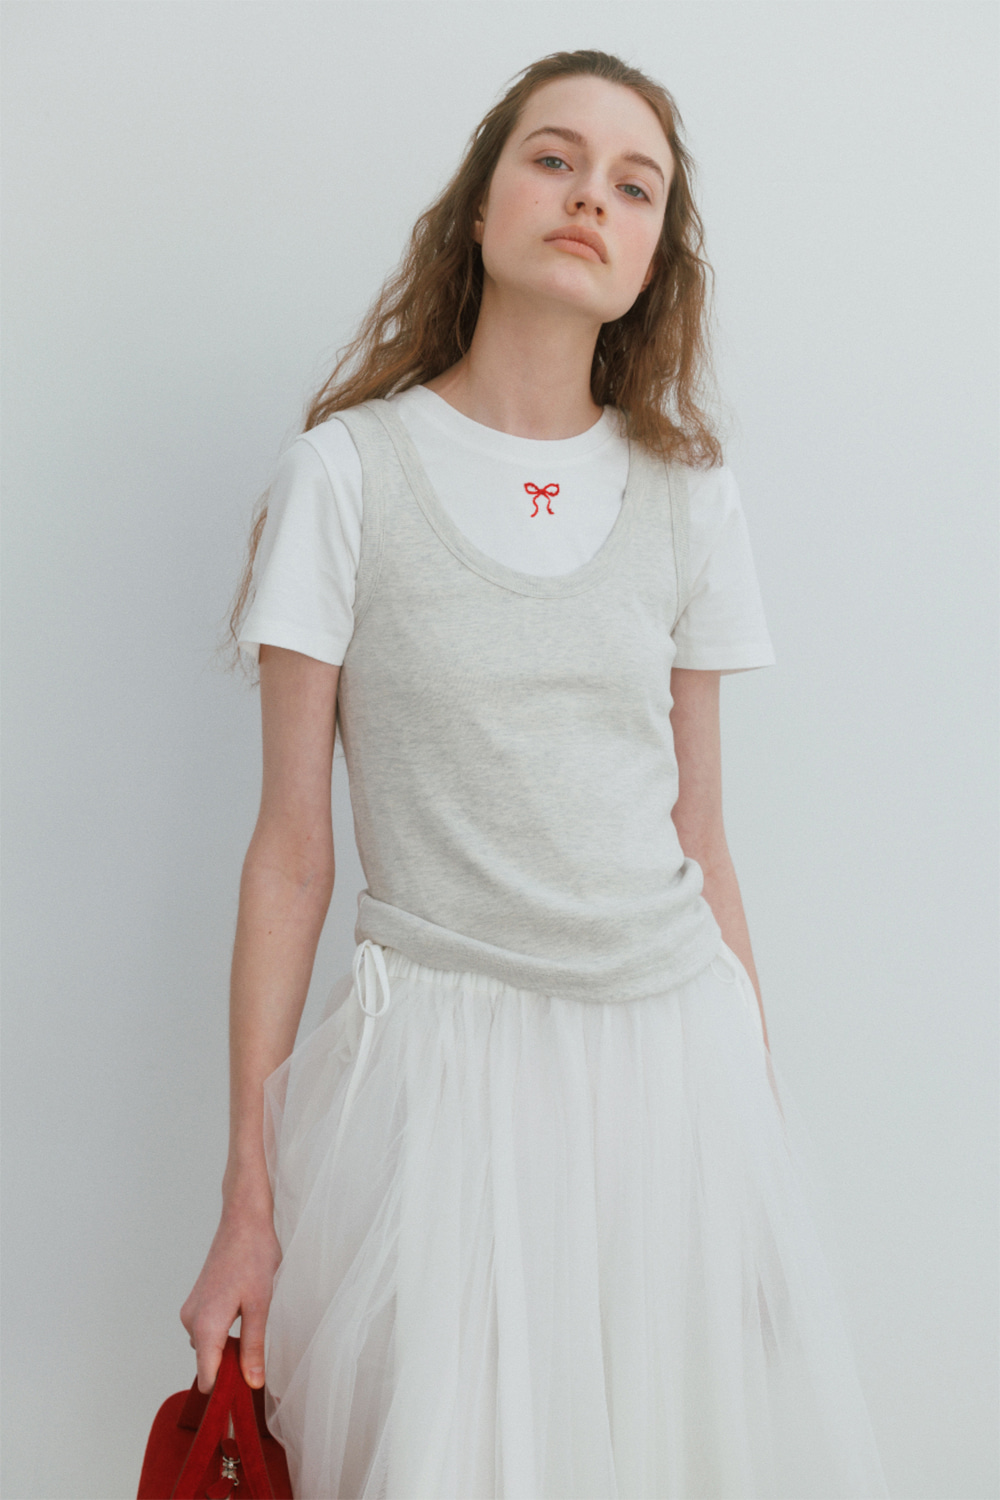 [3 REORDER] Embroidery Beads Tee in White (5/24일 예약배송)